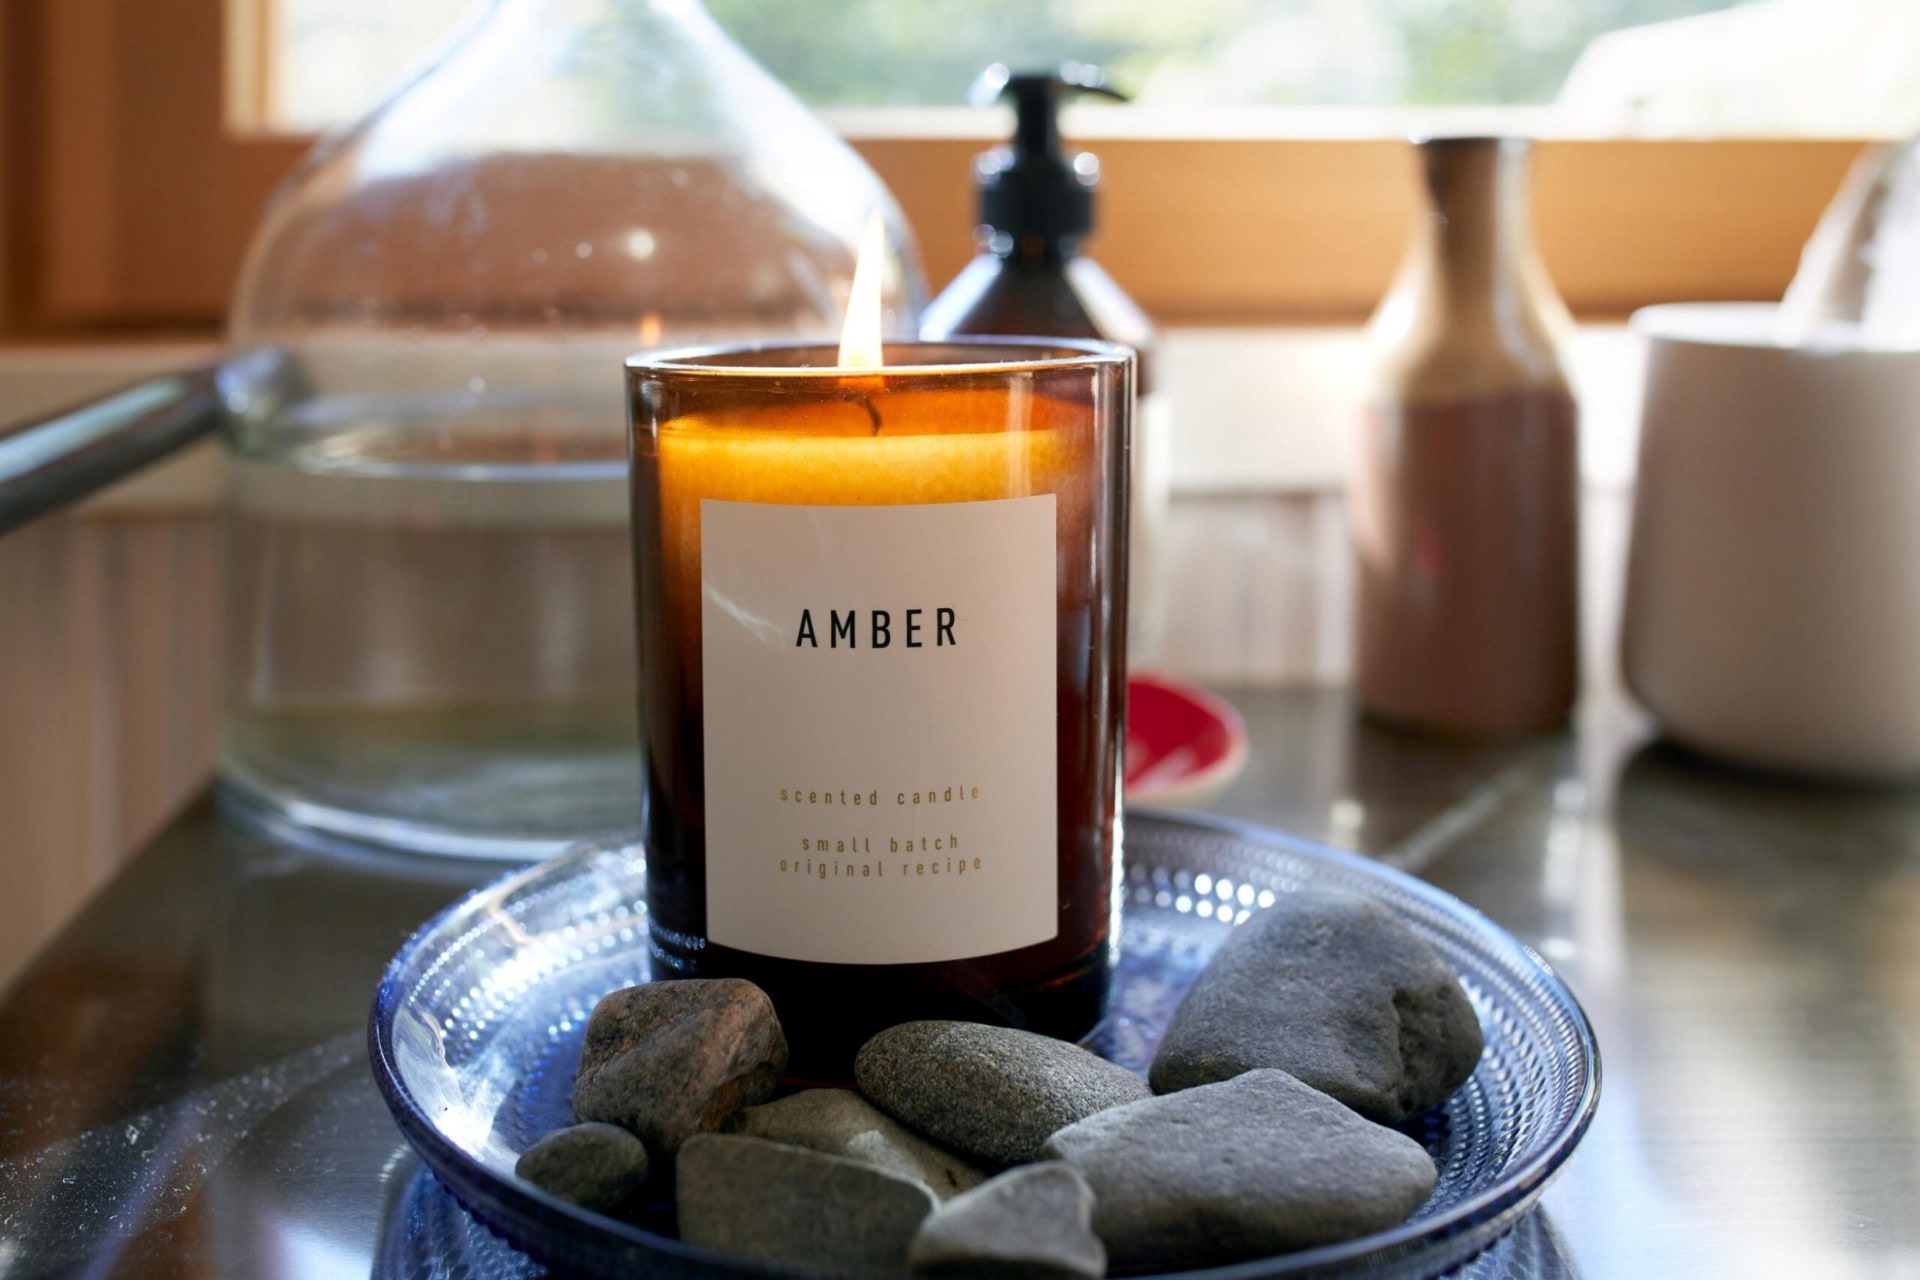 A lit amber coloured Amber brand candle set in a round blue plate next to grey rocks